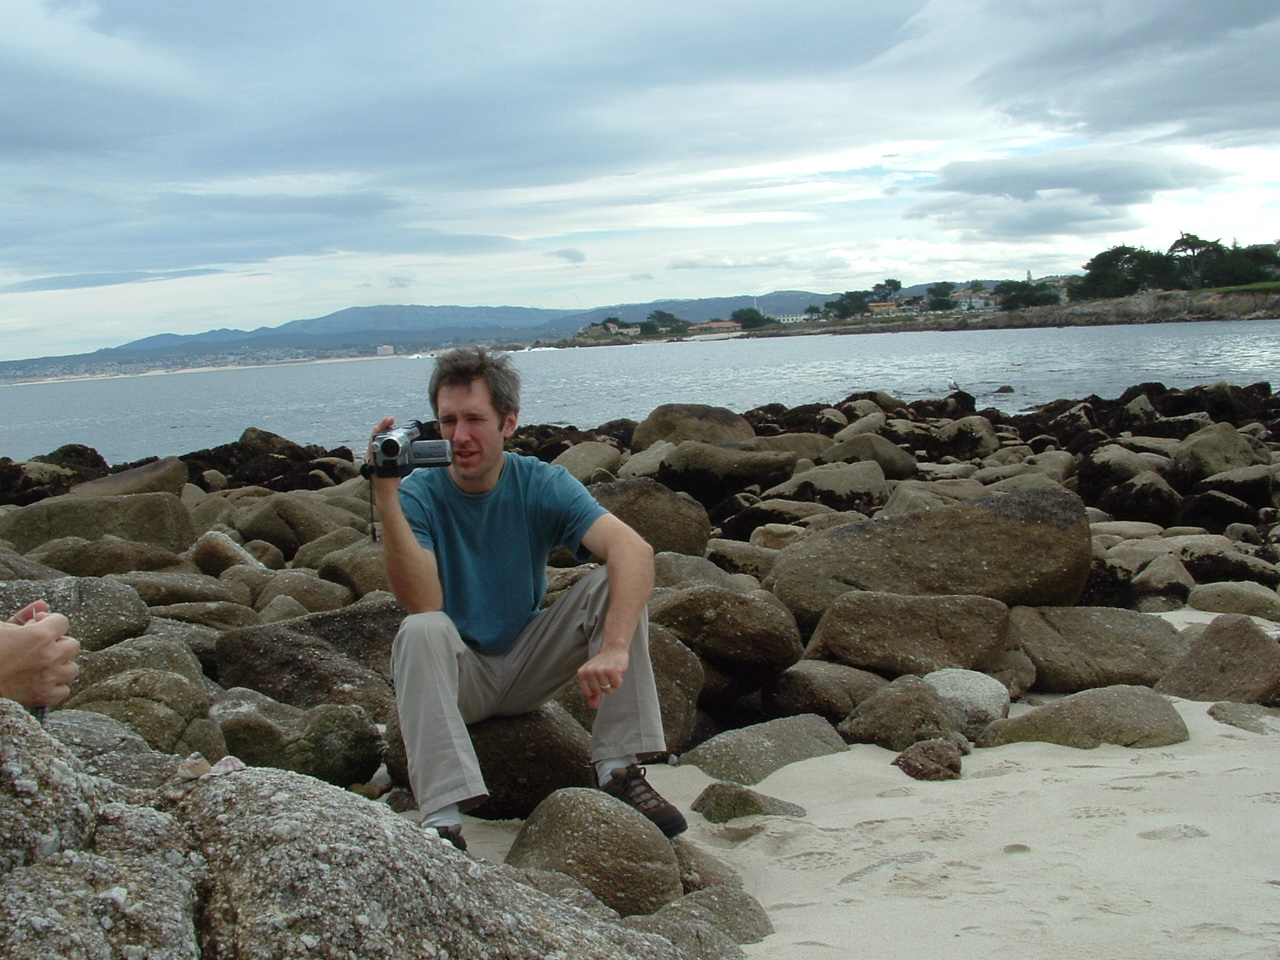 Cully Swansen sitting on gray rocks with Pacific ocean in background, filming with a video camera